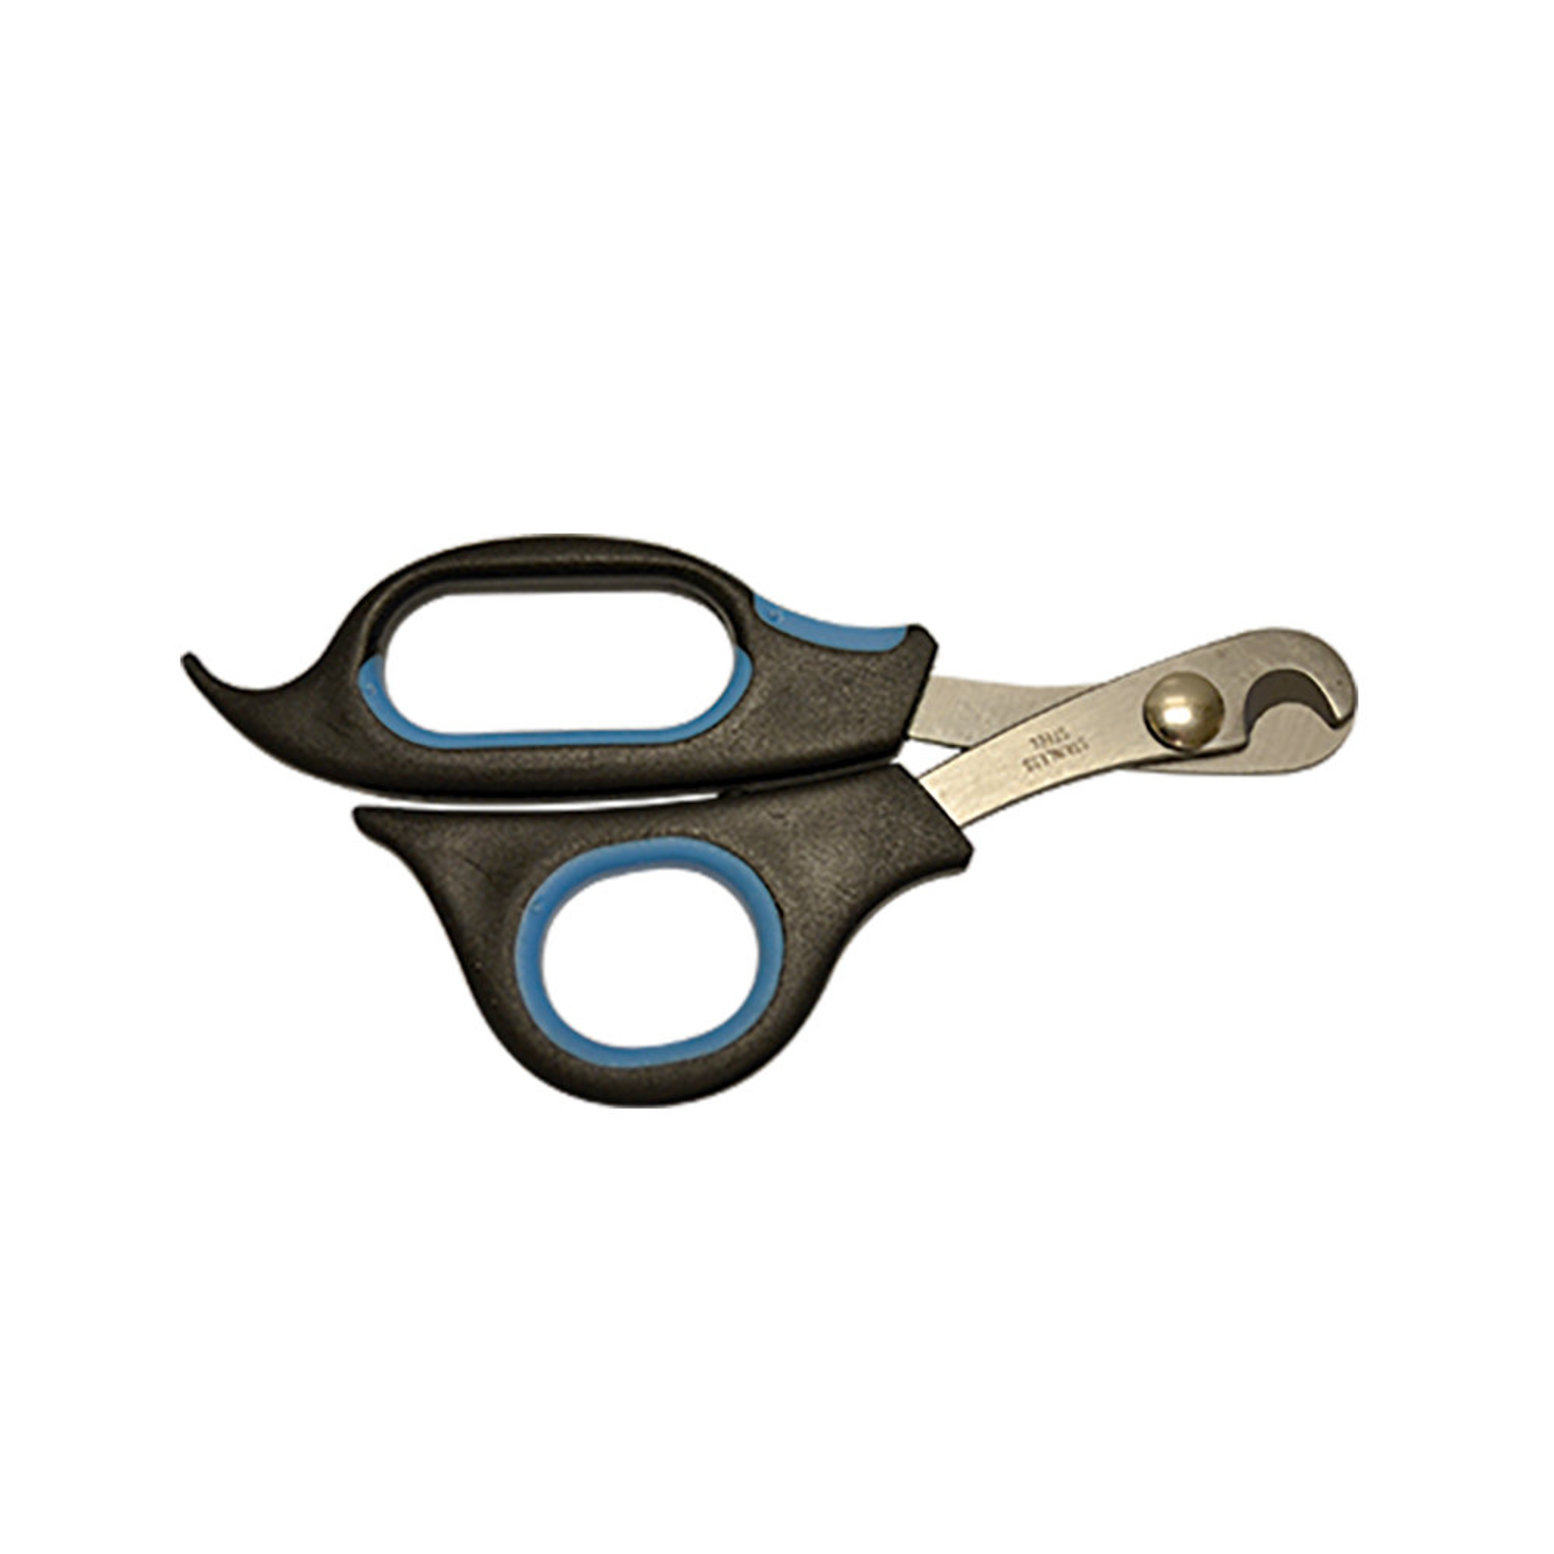 Professional Stainless Steel Toe Clippers (Straight Edge) - Beauticom, Inc.